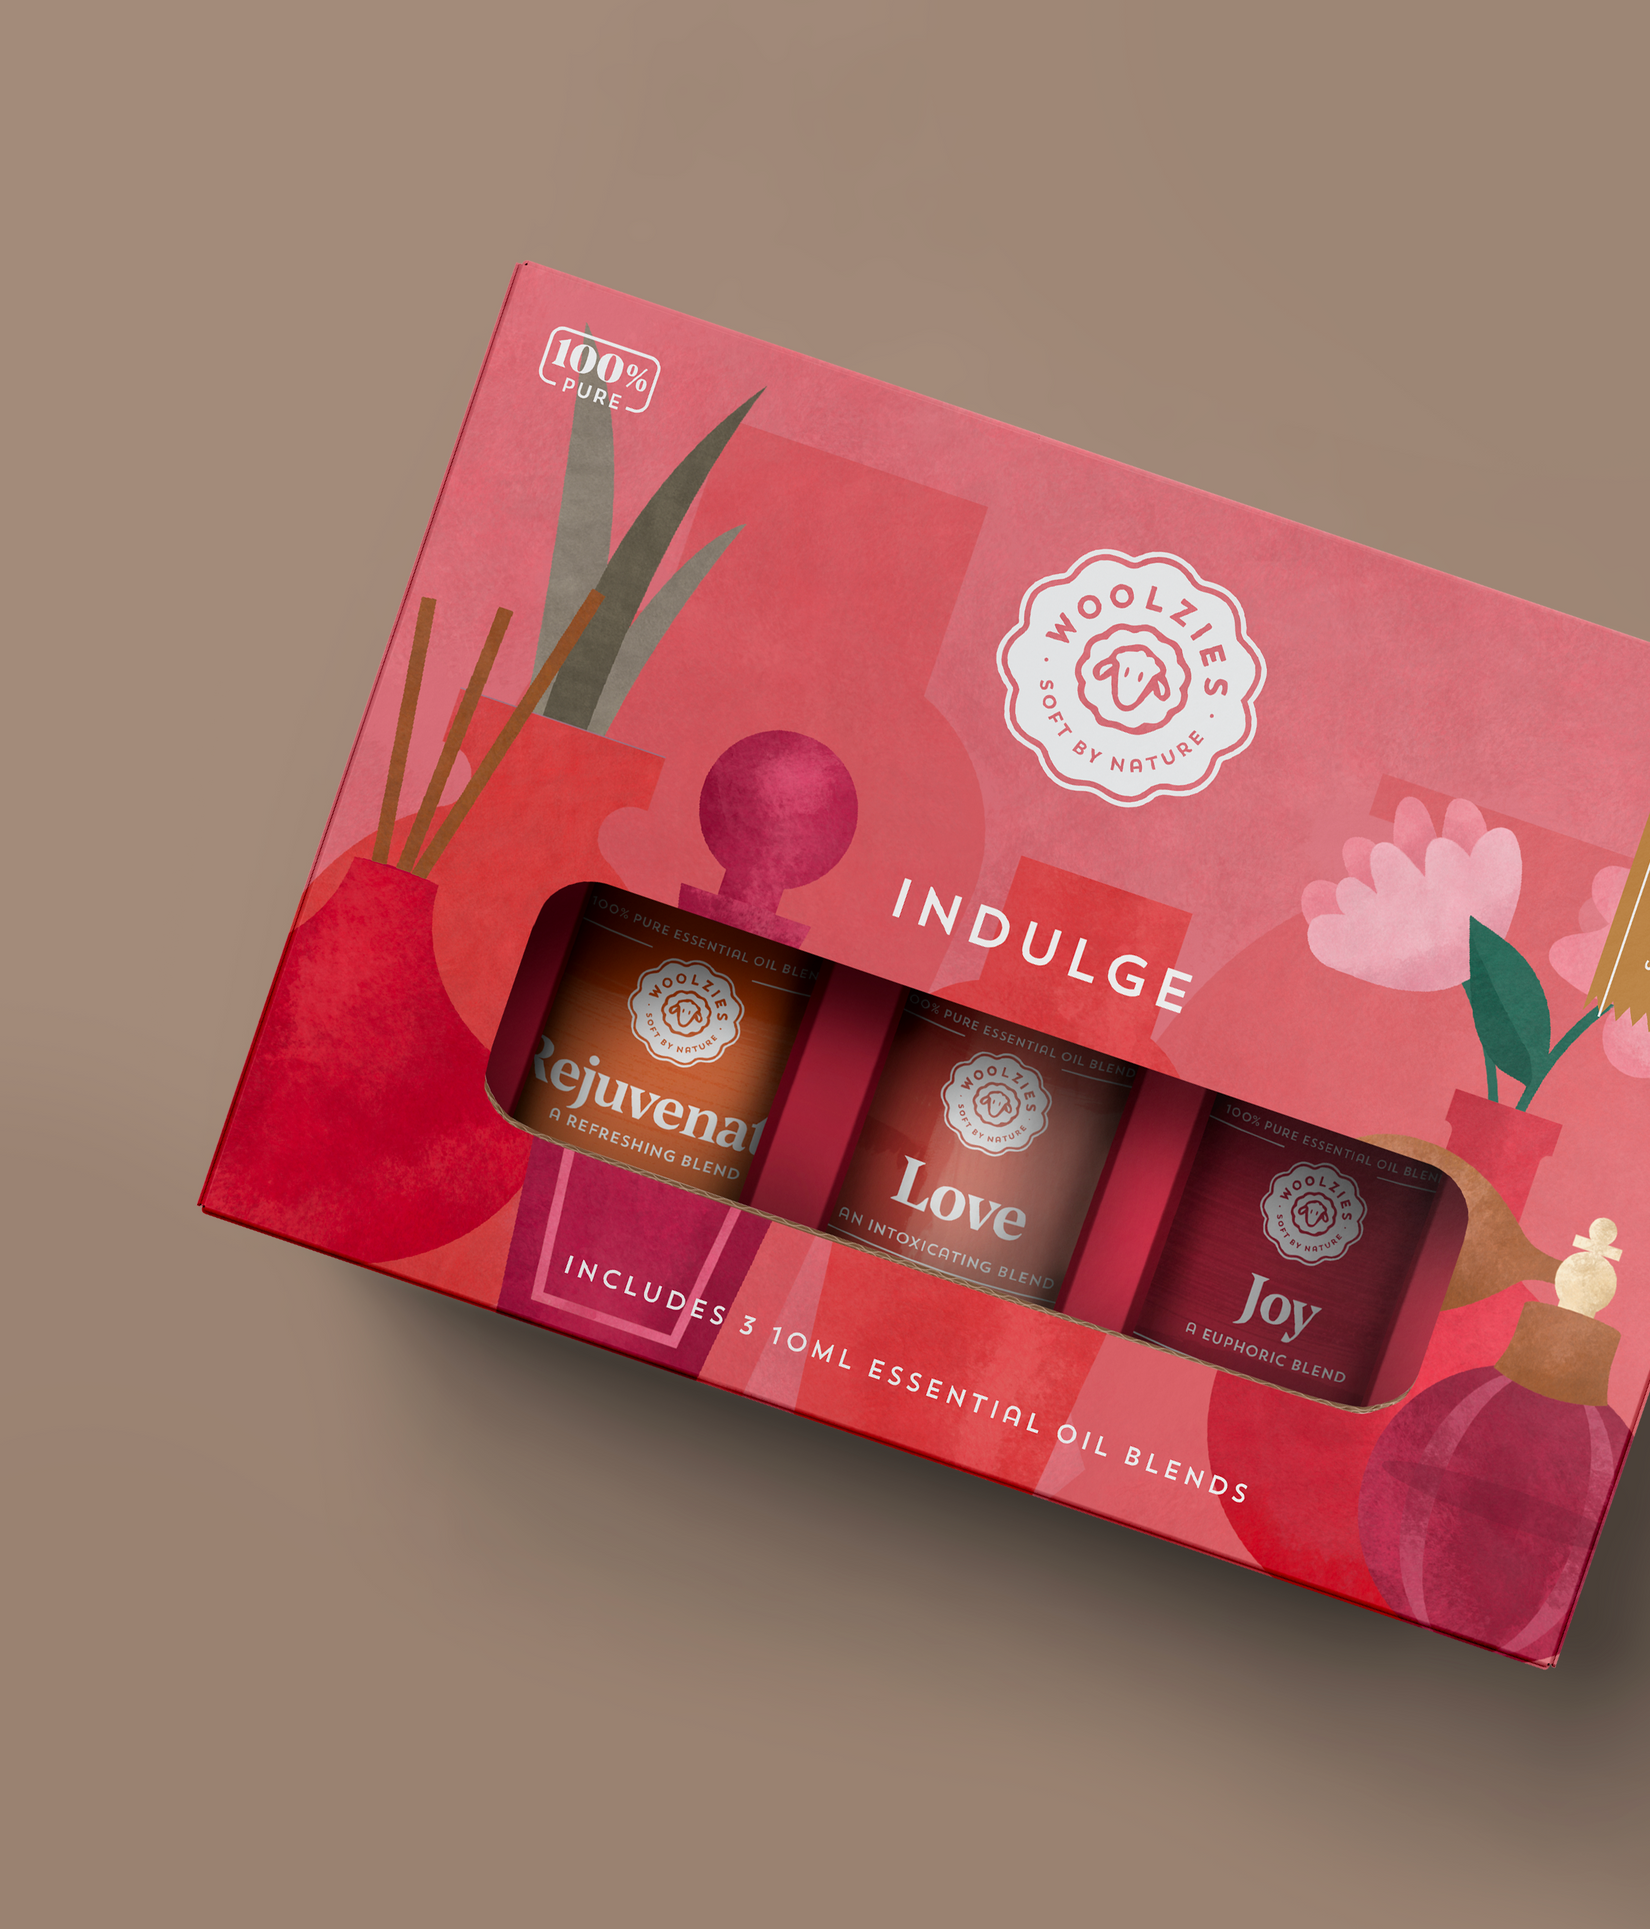 The Indulge Collection